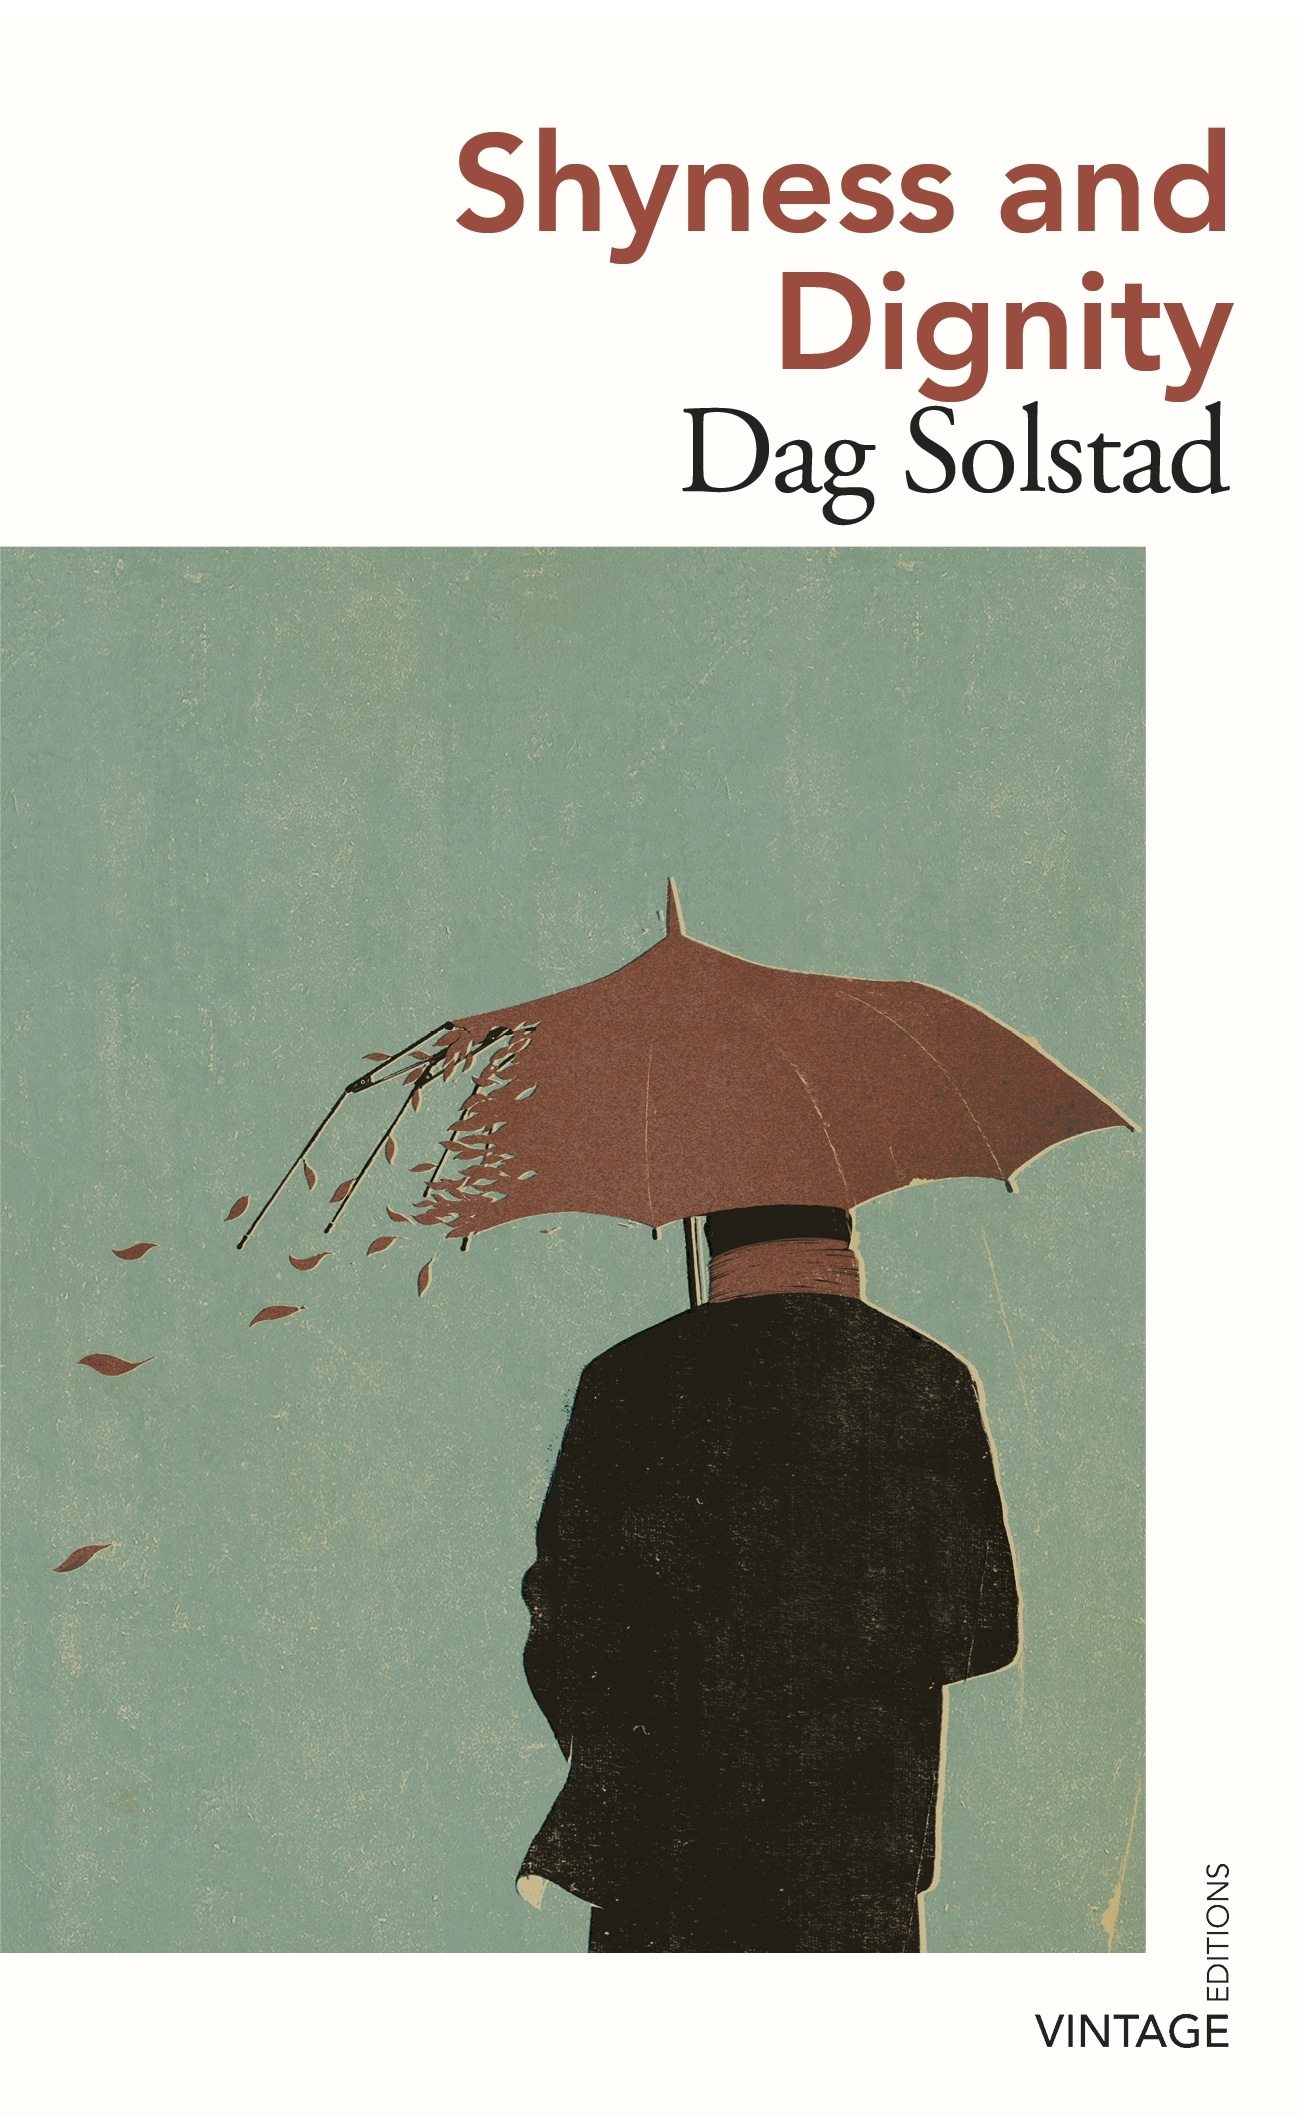 Book “Shyness and Dignity” by Dag Solstad — June 3, 2021